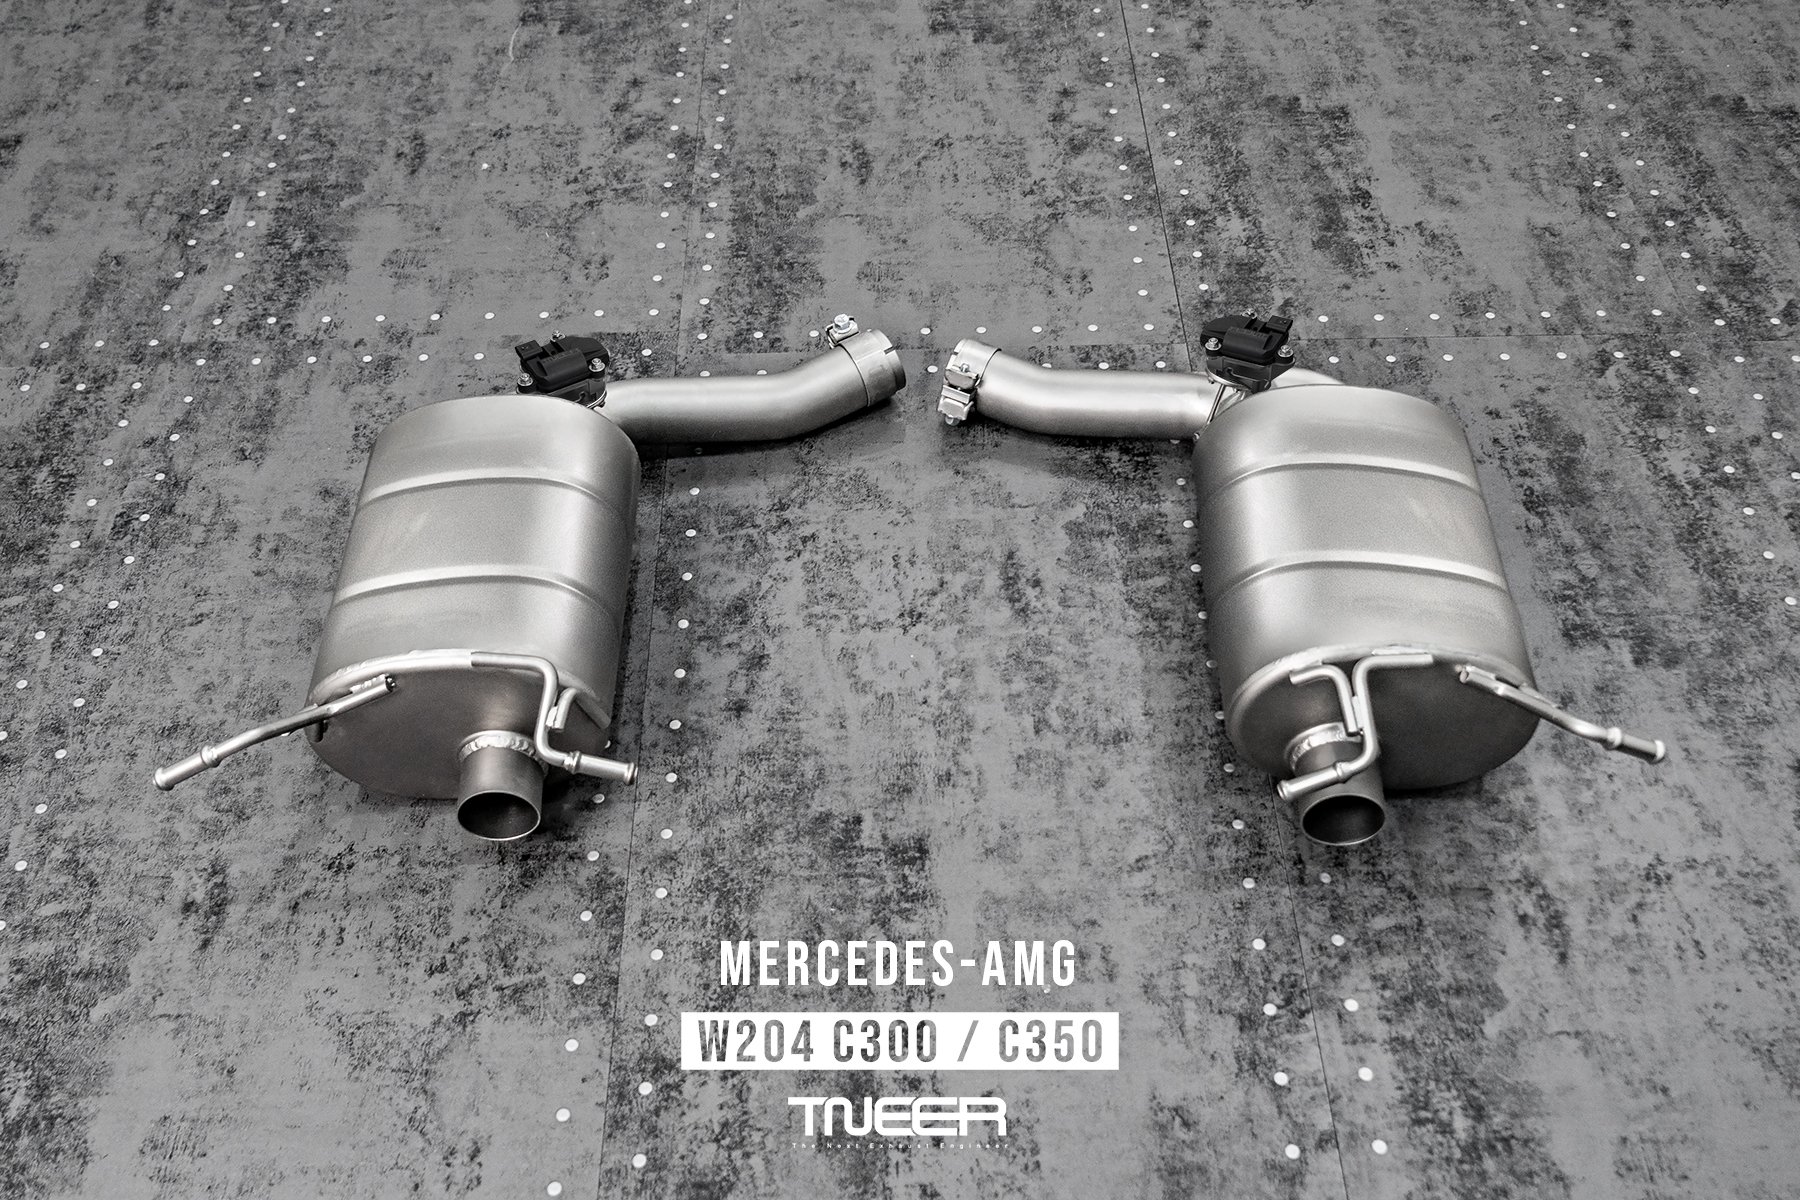 Mercedes-Benz W204 C300 TNEER Performance Exhaust System with Quad Silver Tips